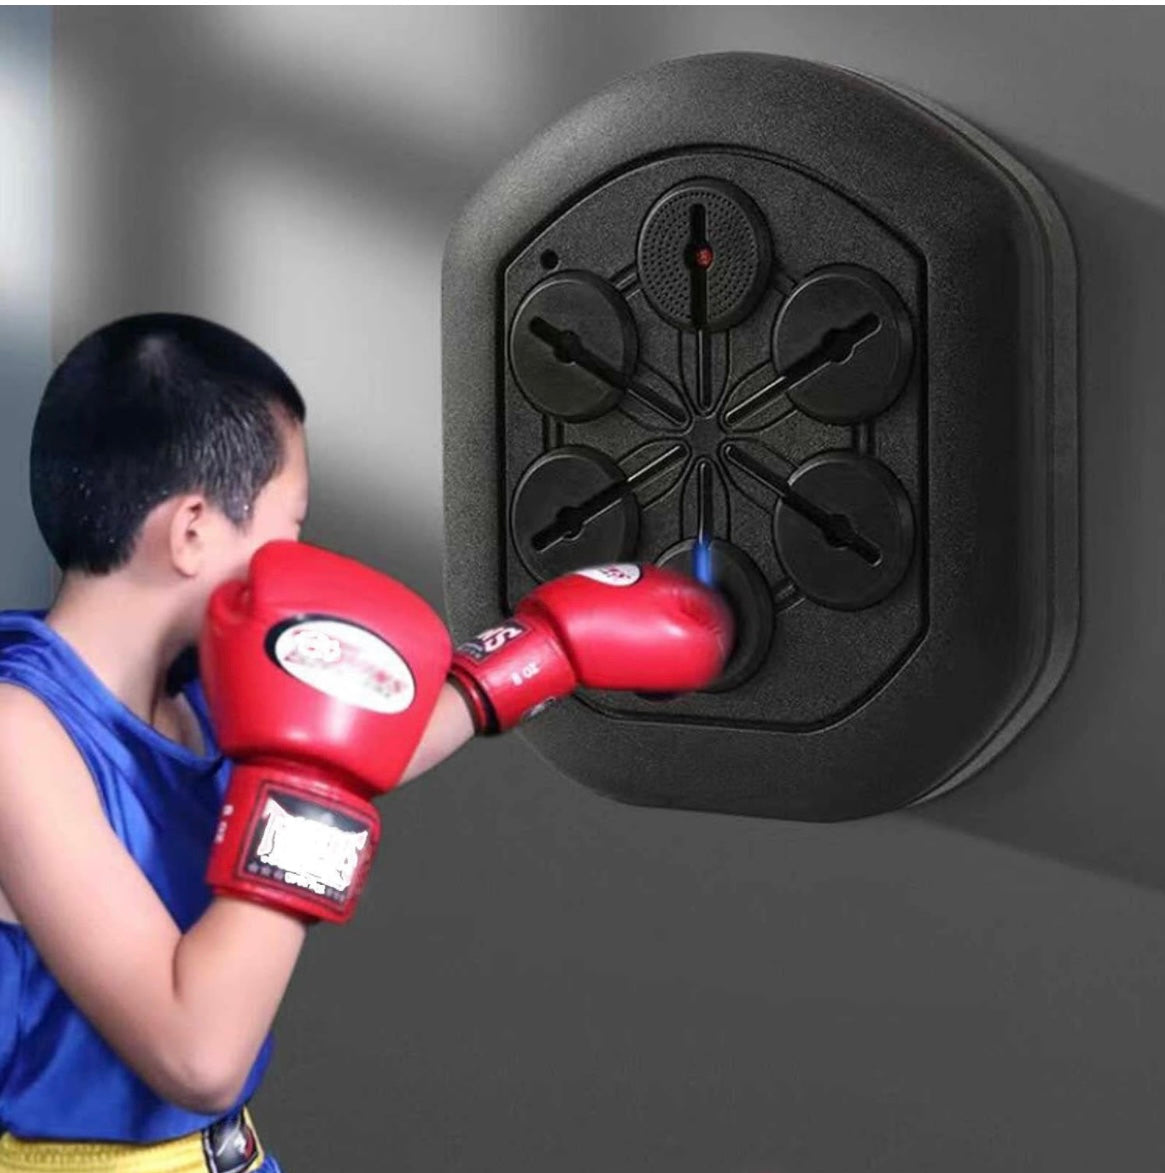 Smart Music Boxing Machine Wall Target LED Lighted Sandbag Relaxing Reaction Training Target for Boxing Sports Agility Reaction